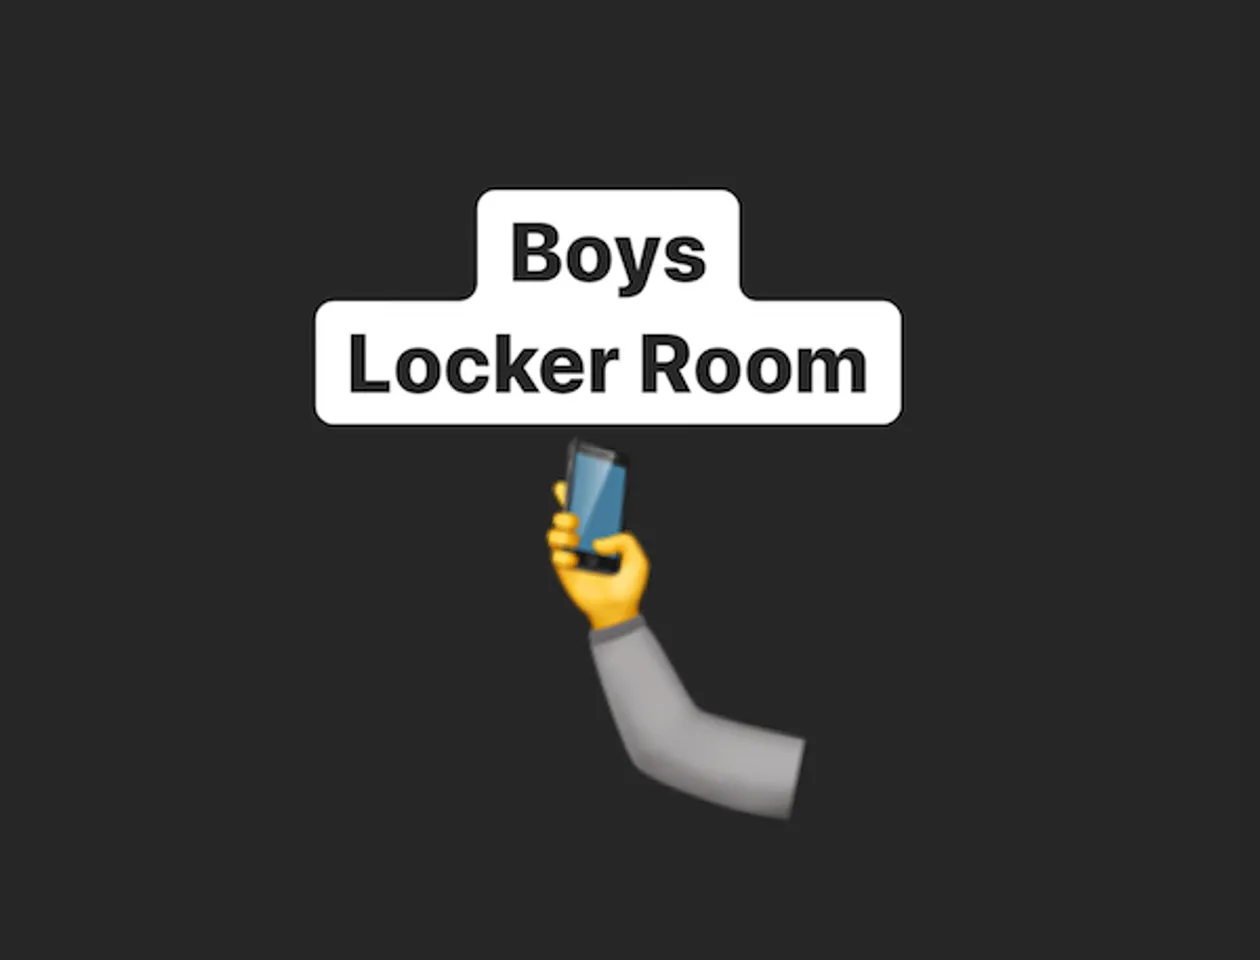 15 year old held in connection with Delhi Boys Locker Room chats